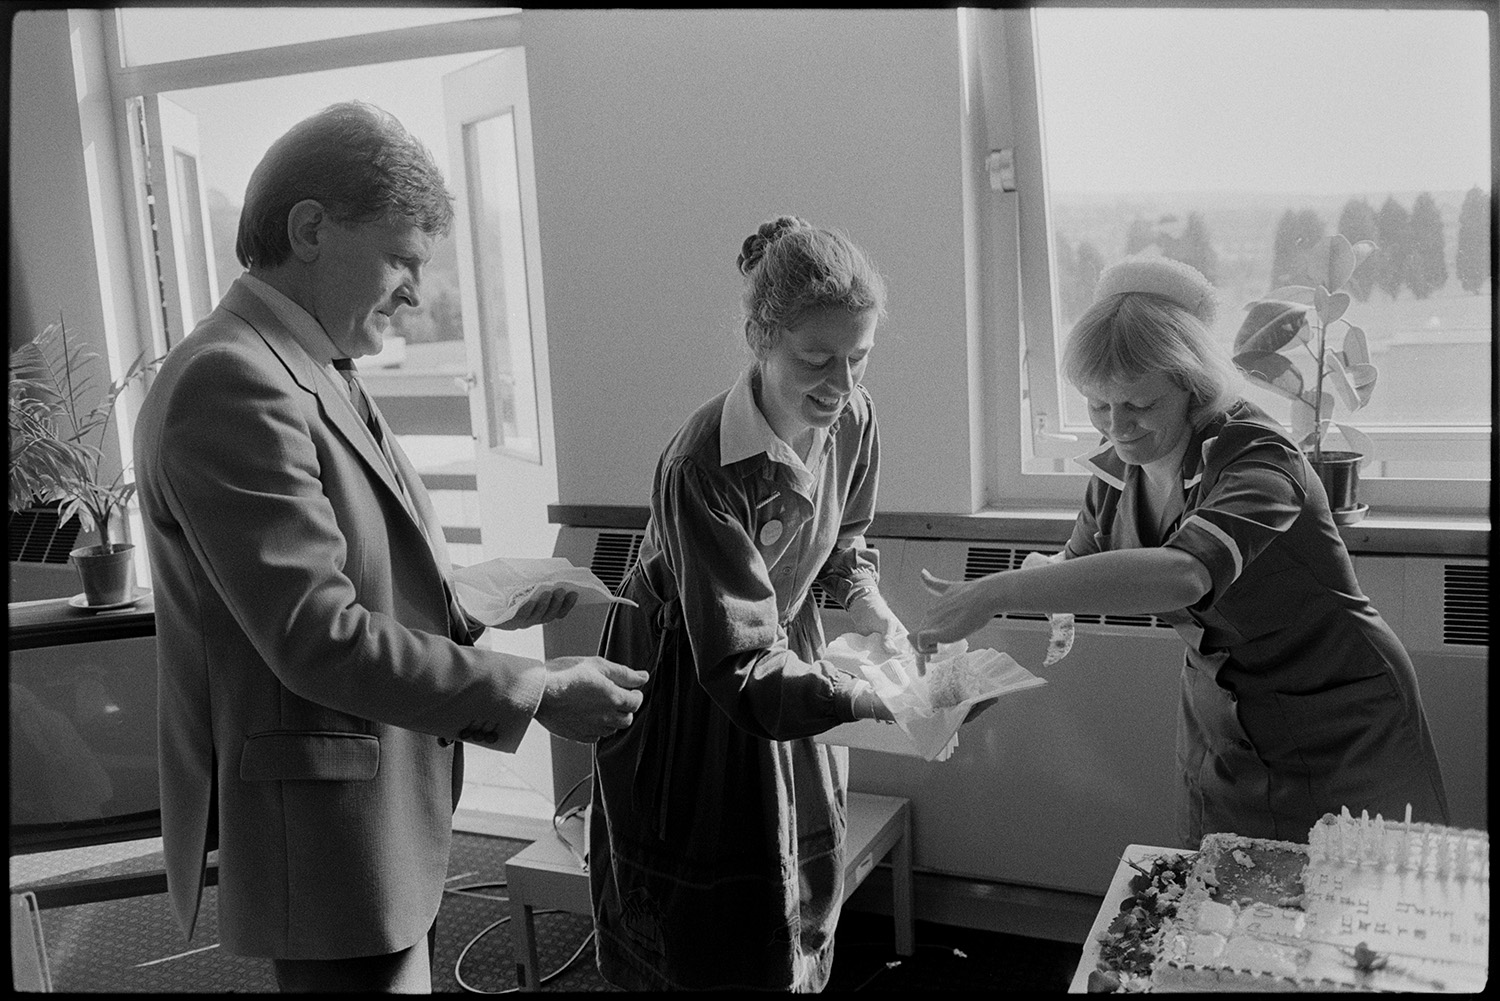 TV presenter at hospital event cutting cake.
[Ian Stirling, a TV presenter, and Diana Johnson collecting pieces of cake from a nurse to give to patients at an event in Barnstaple General Hospital.]